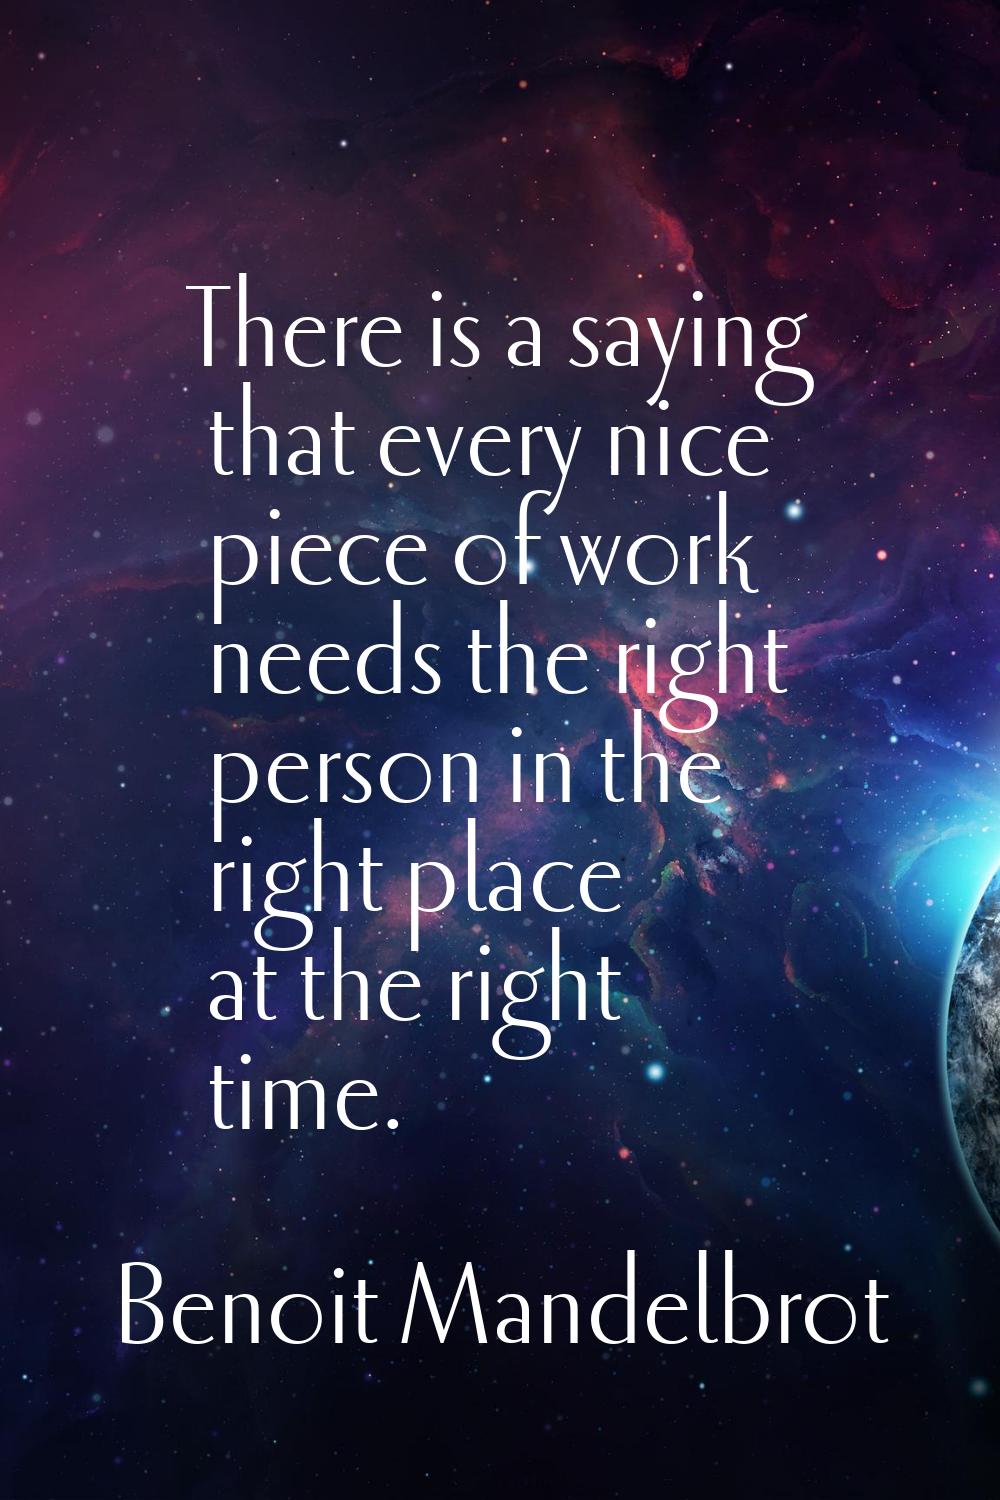 There is a saying that every nice piece of work needs the right person in the right place at the ri